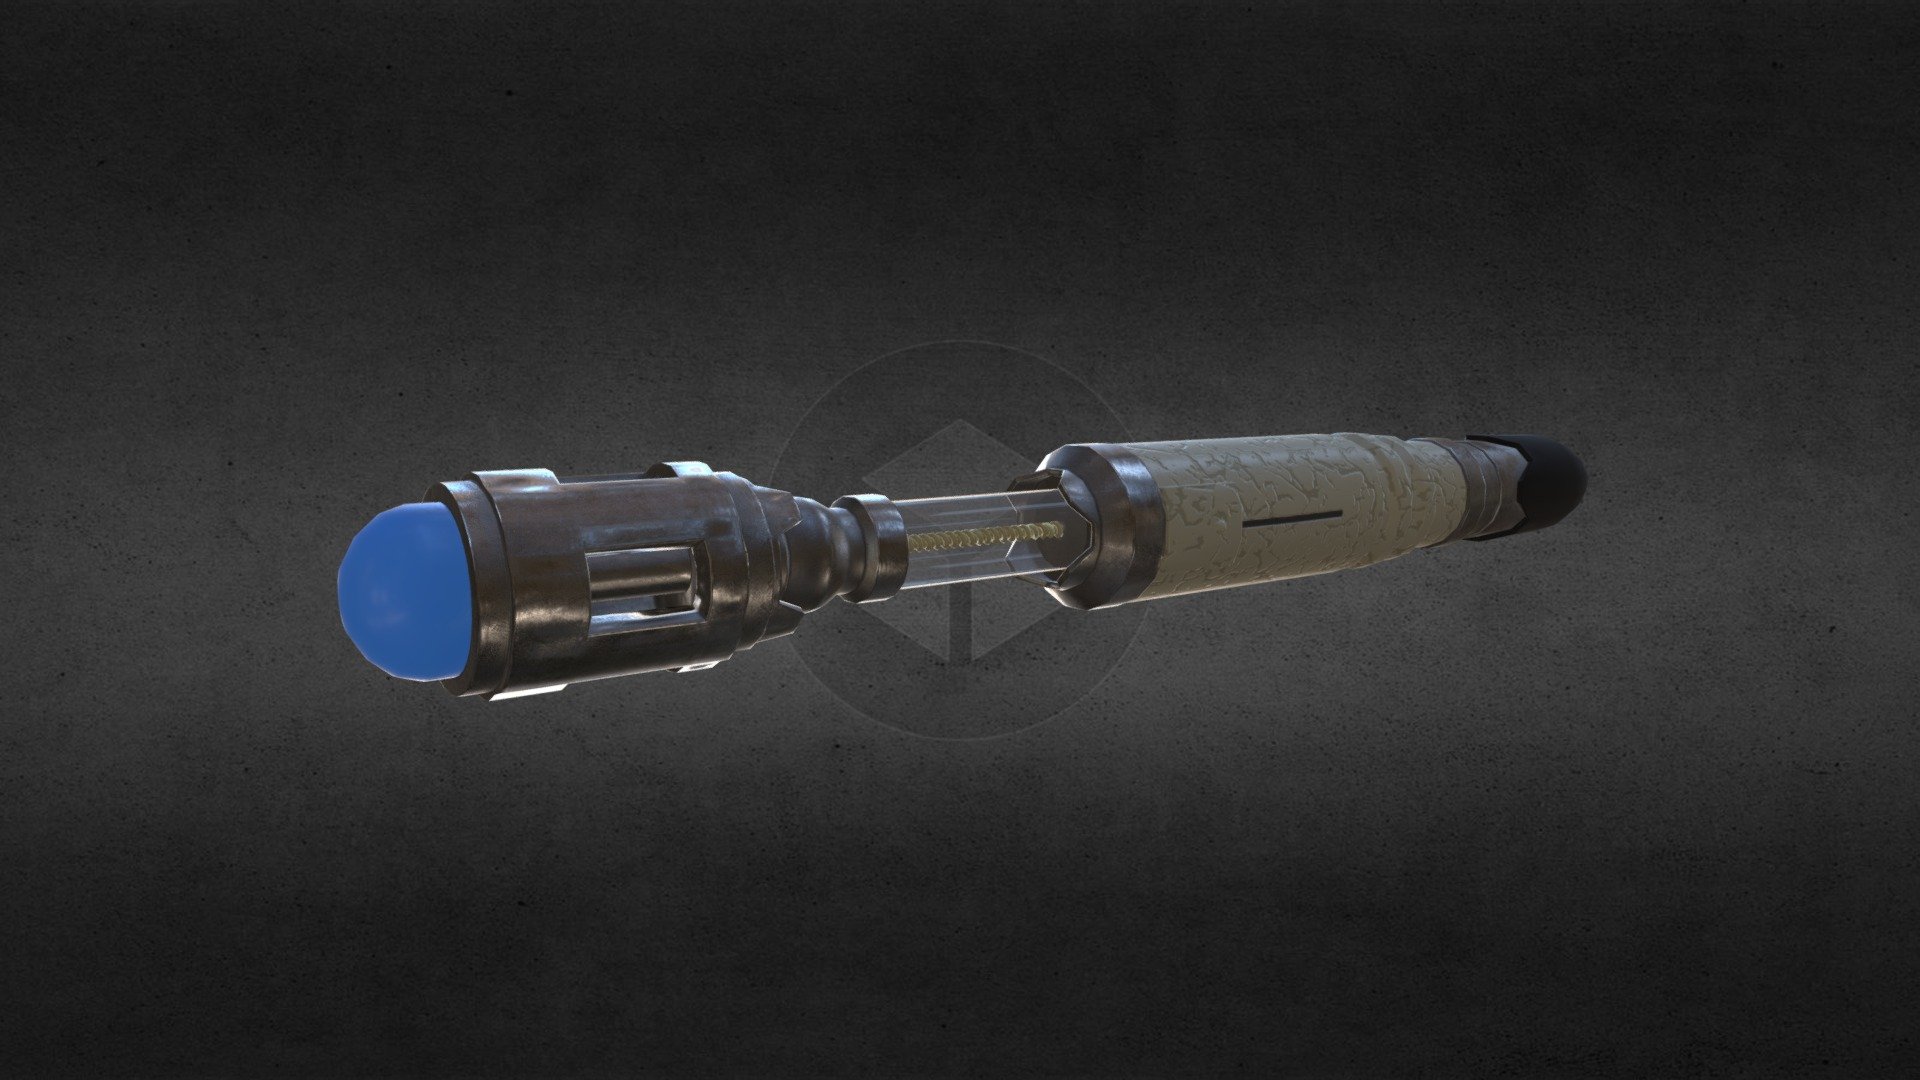 A quick one hour model of the 10th Doctor's Sonic Screwdriver

Made in Blender and Substance Painter

Too see more of my work visit my Artstation - 10th Doctor's Sonic Screwdriver! - Buy Royalty Free 3D model by DafVader 3d model